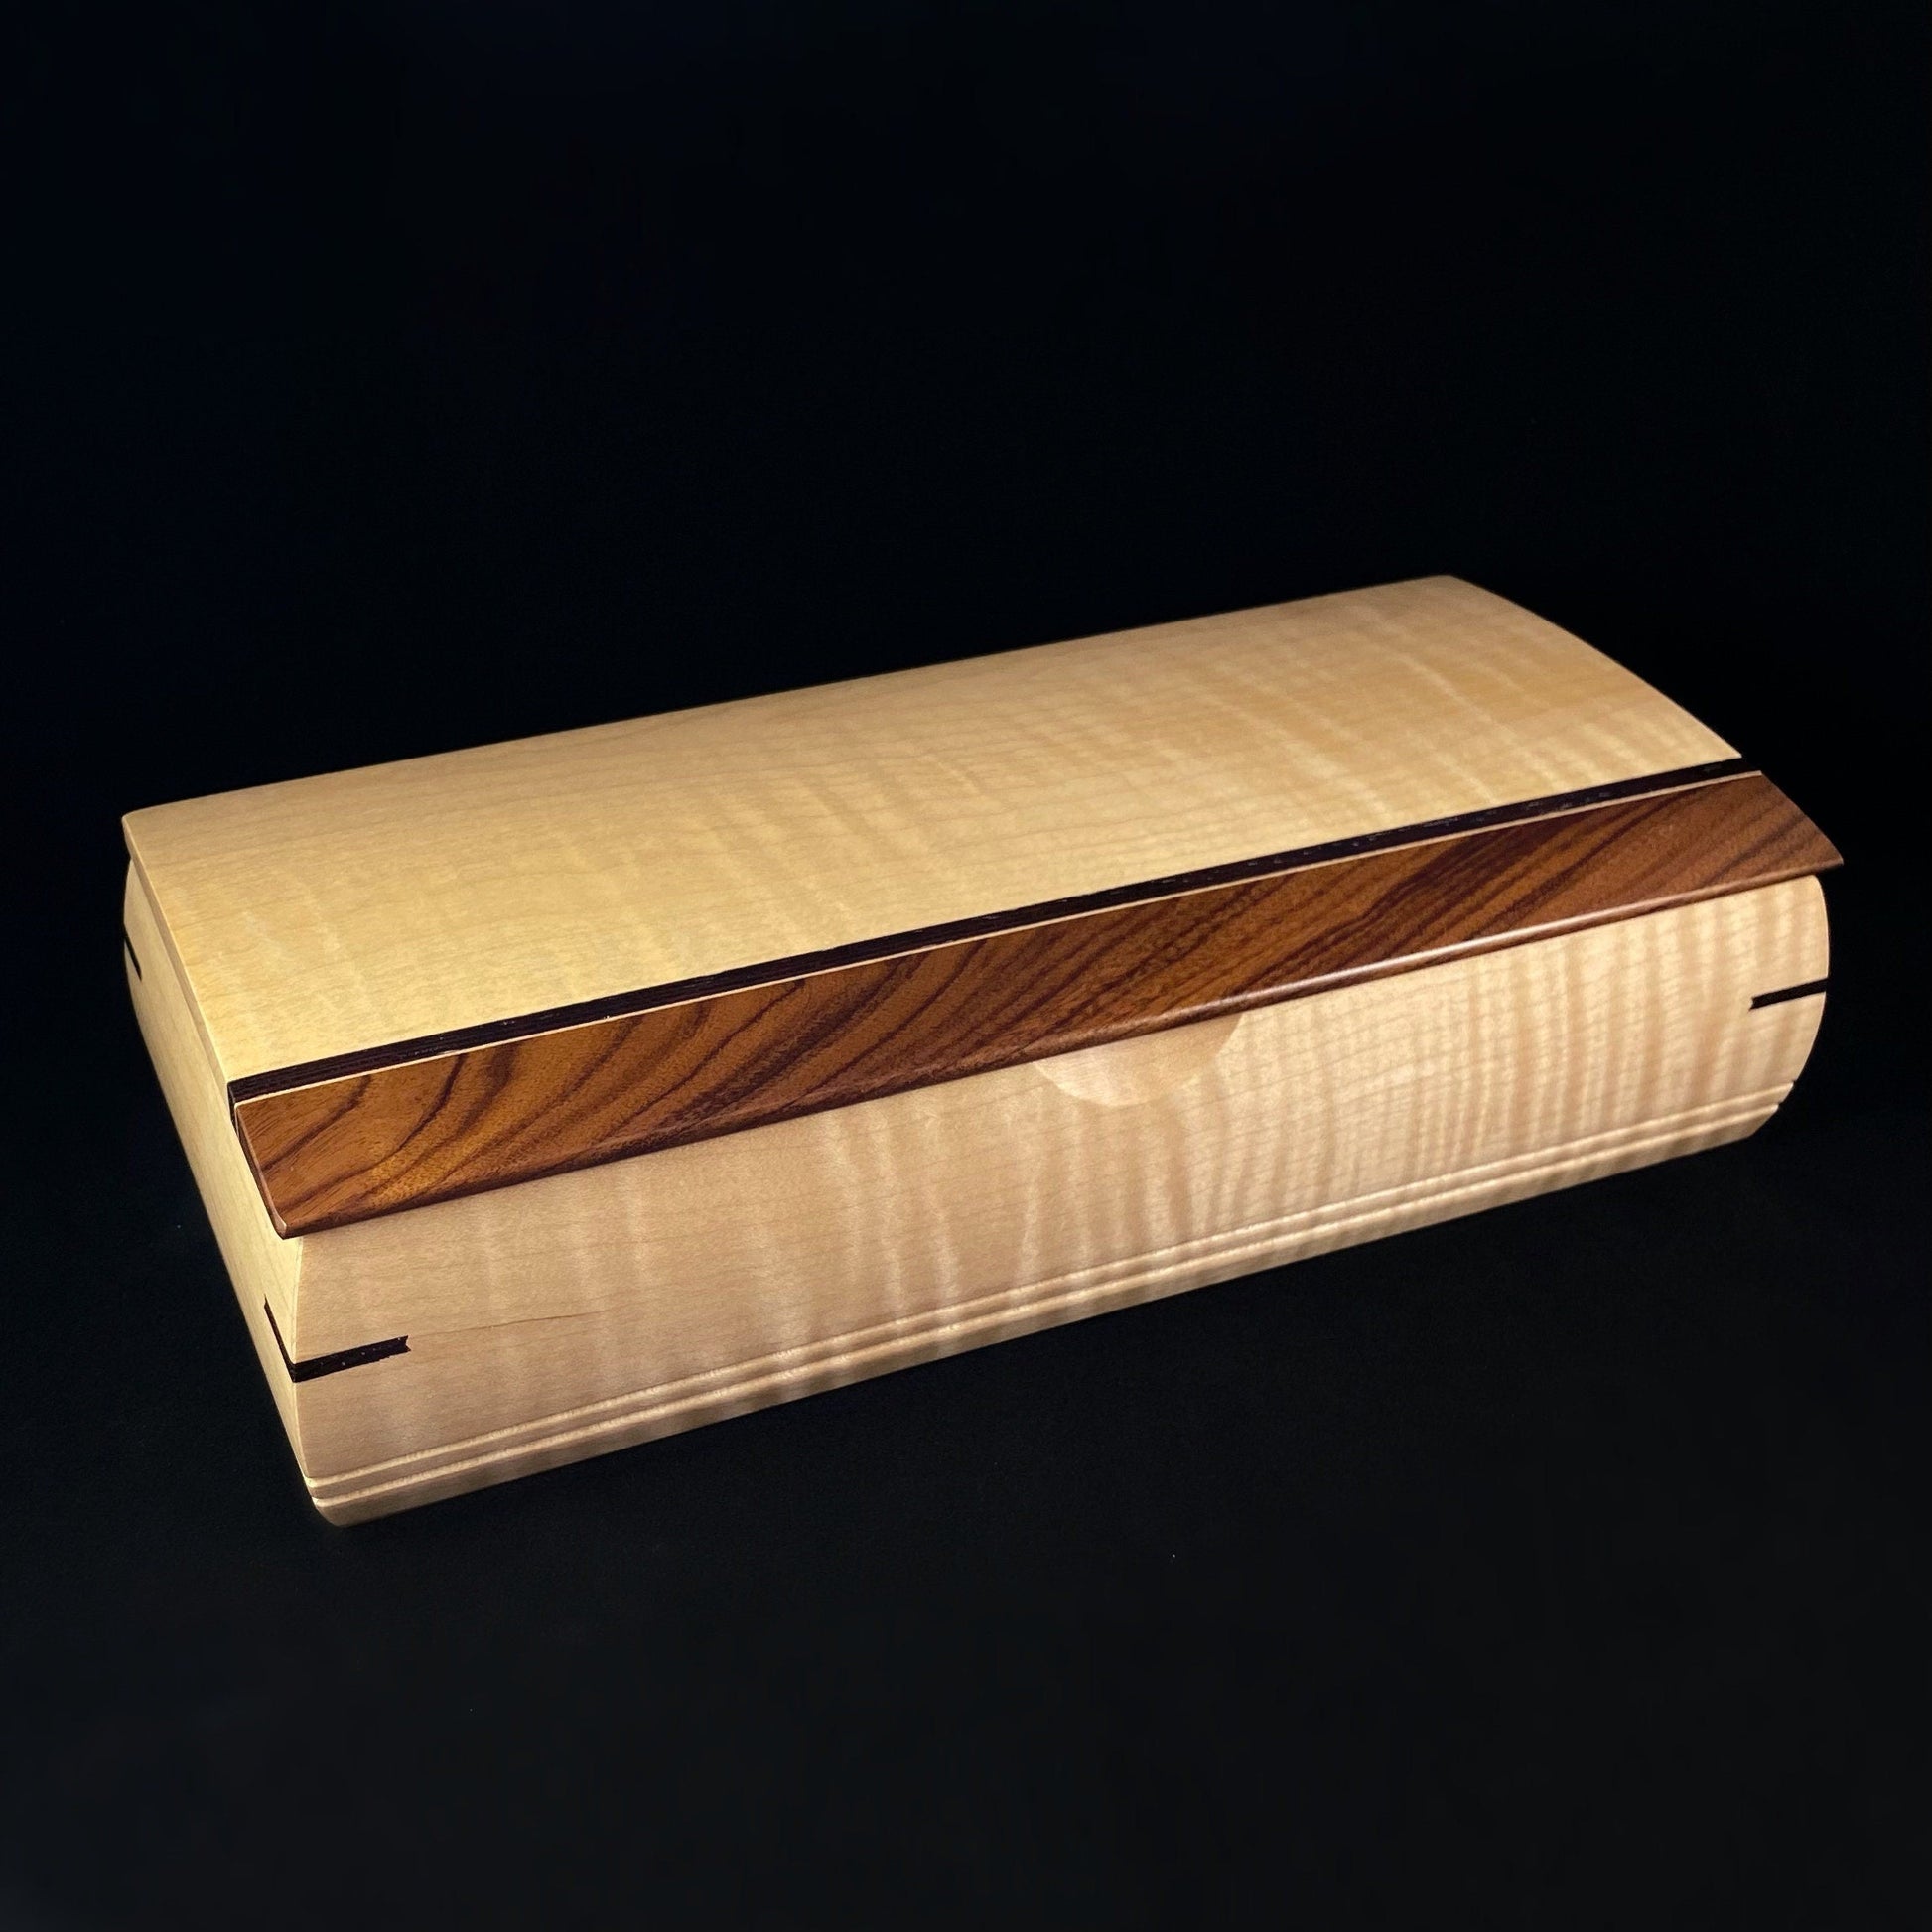 Large Handmade Wooden Treasure Box with Bolivian Rosewood, Curly Maple, and Wenge, Made in USA